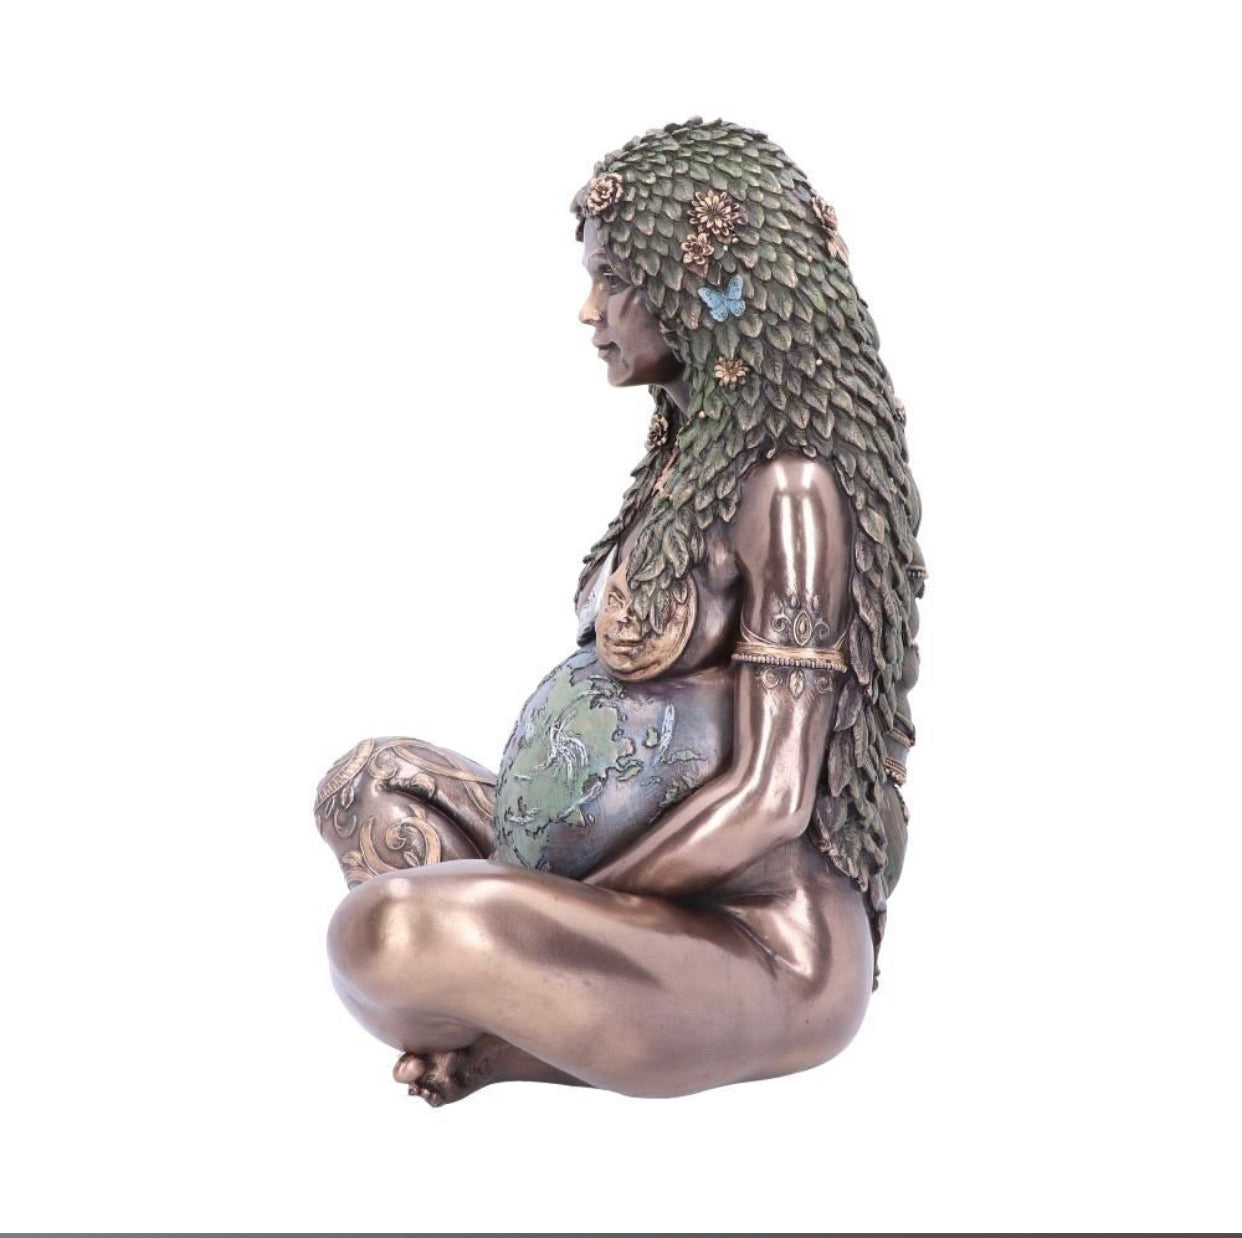 STATUE || MOTHER EARTH GODDESS - BRONZE - LARGE